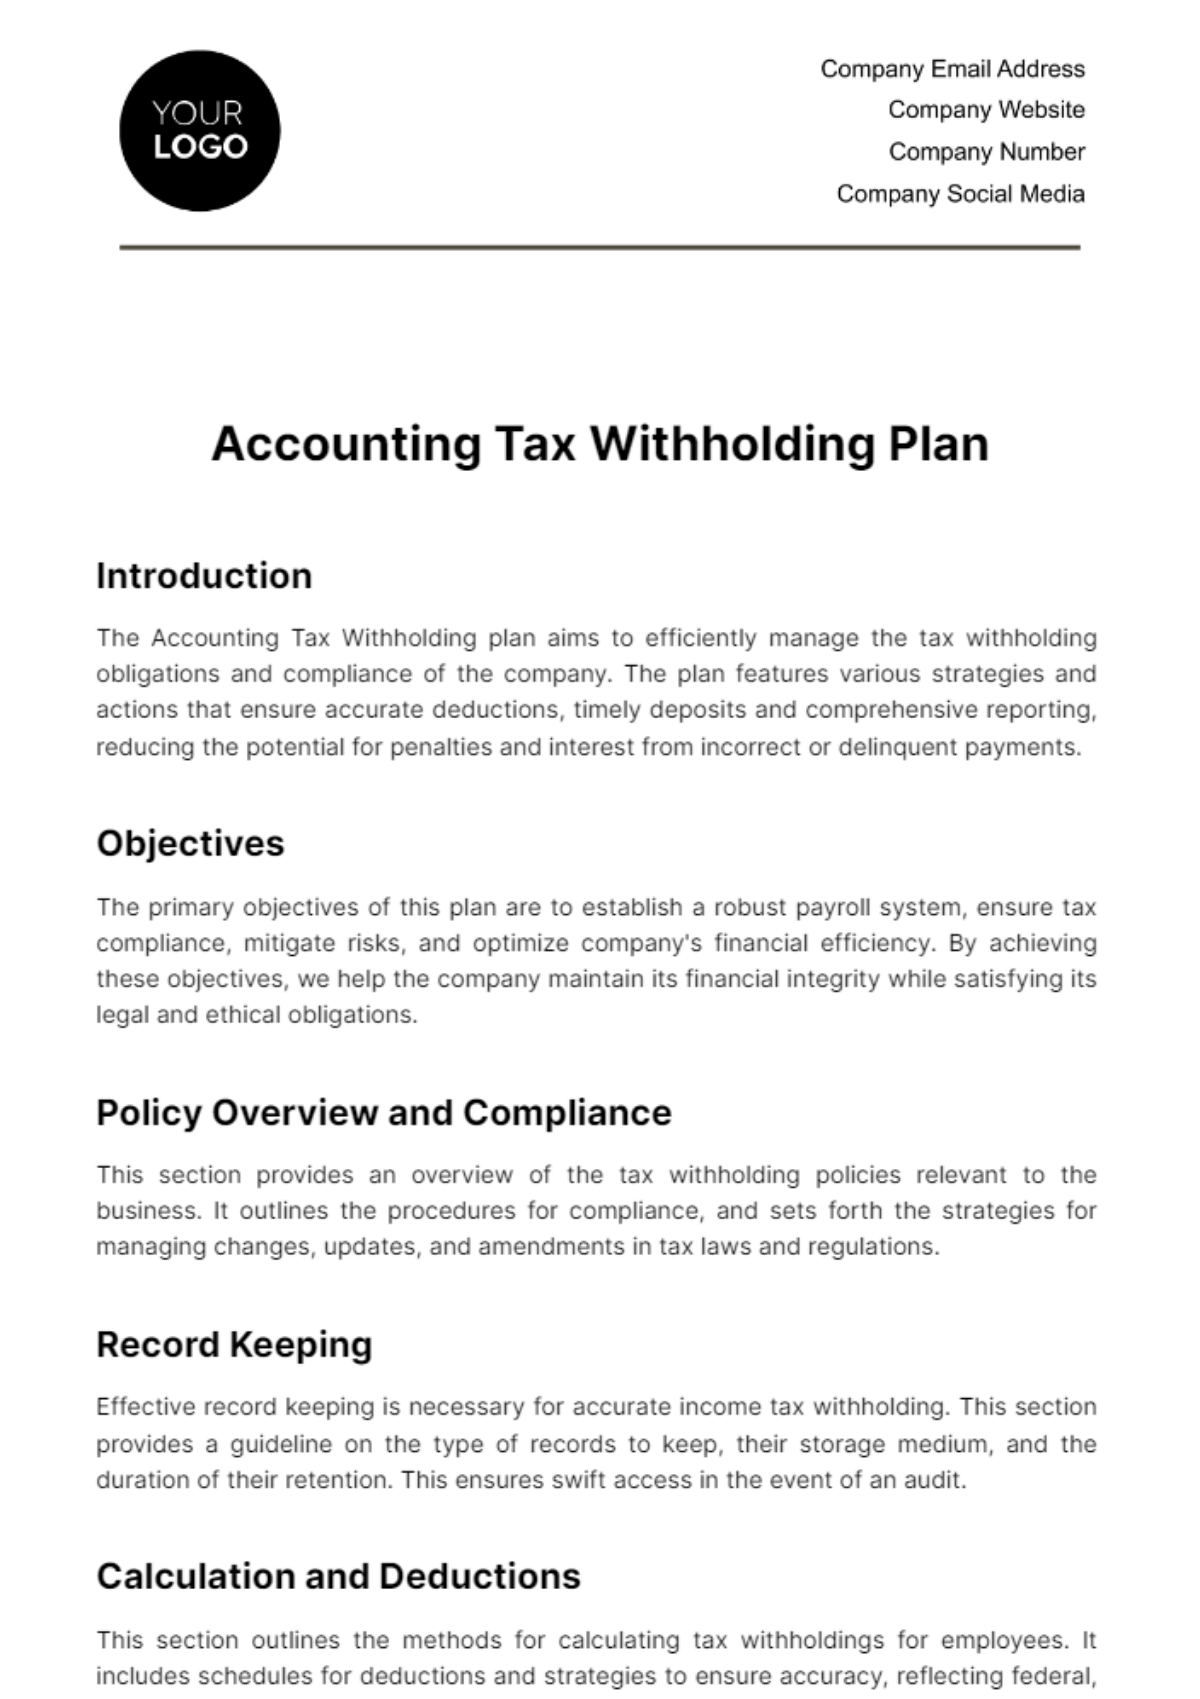 Accounting Tax Withholding Plan Template